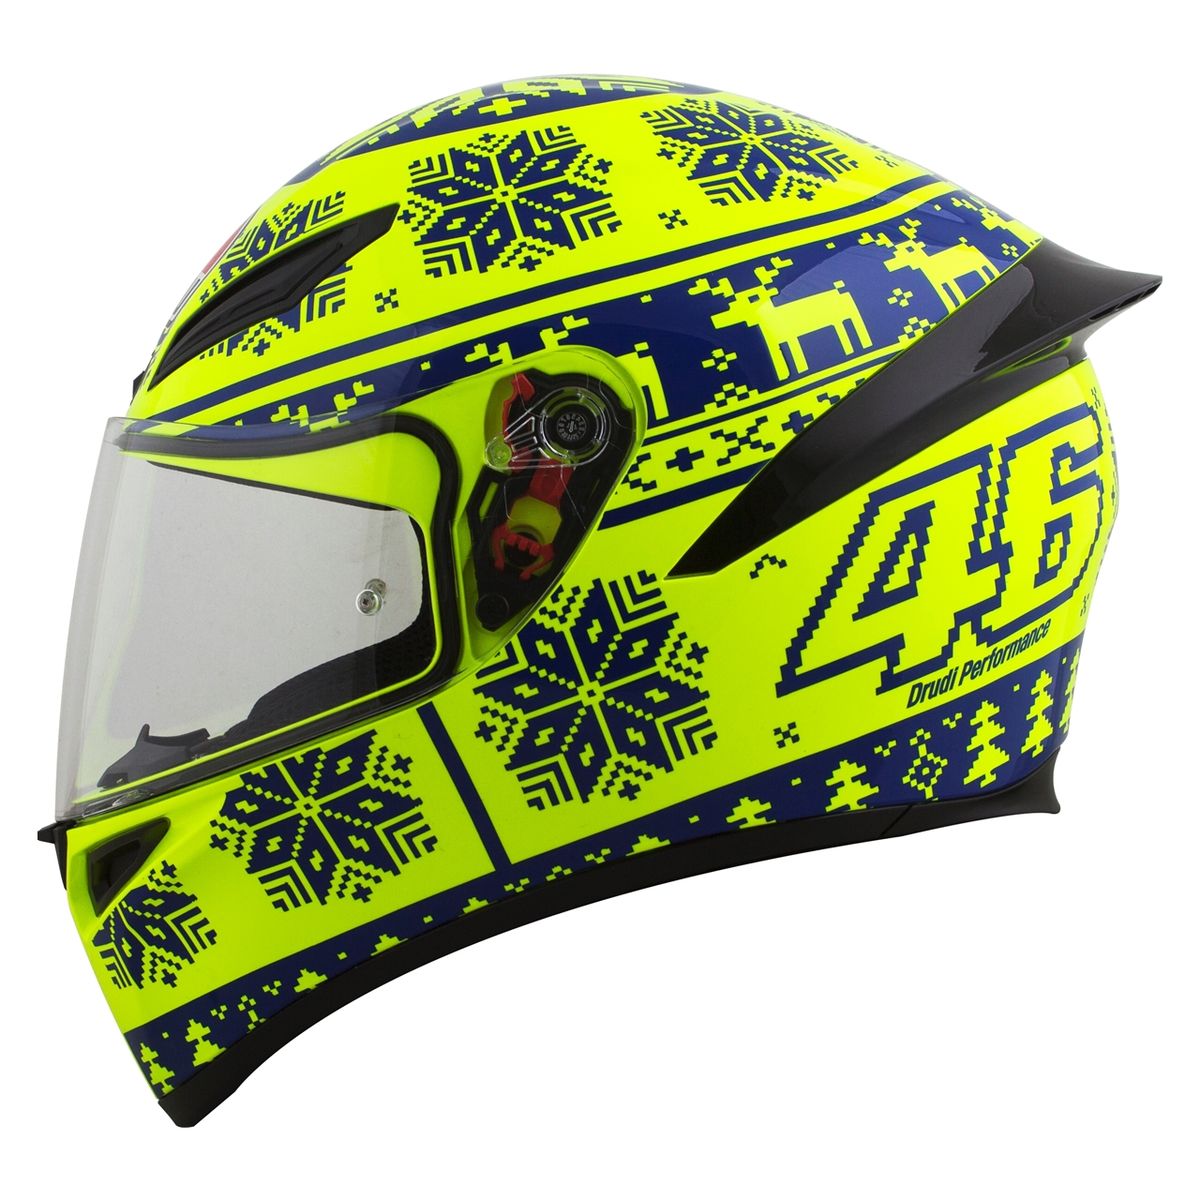 Racing World - RESTOCK! AGV K1 Solid Black Helmet Aerodynamic shape,  racing-developed front air vents and wind-tunnel engineered aero spoiler  maximize performances while providing stability at higher speed. Panoramic  anti-scratch visor allows